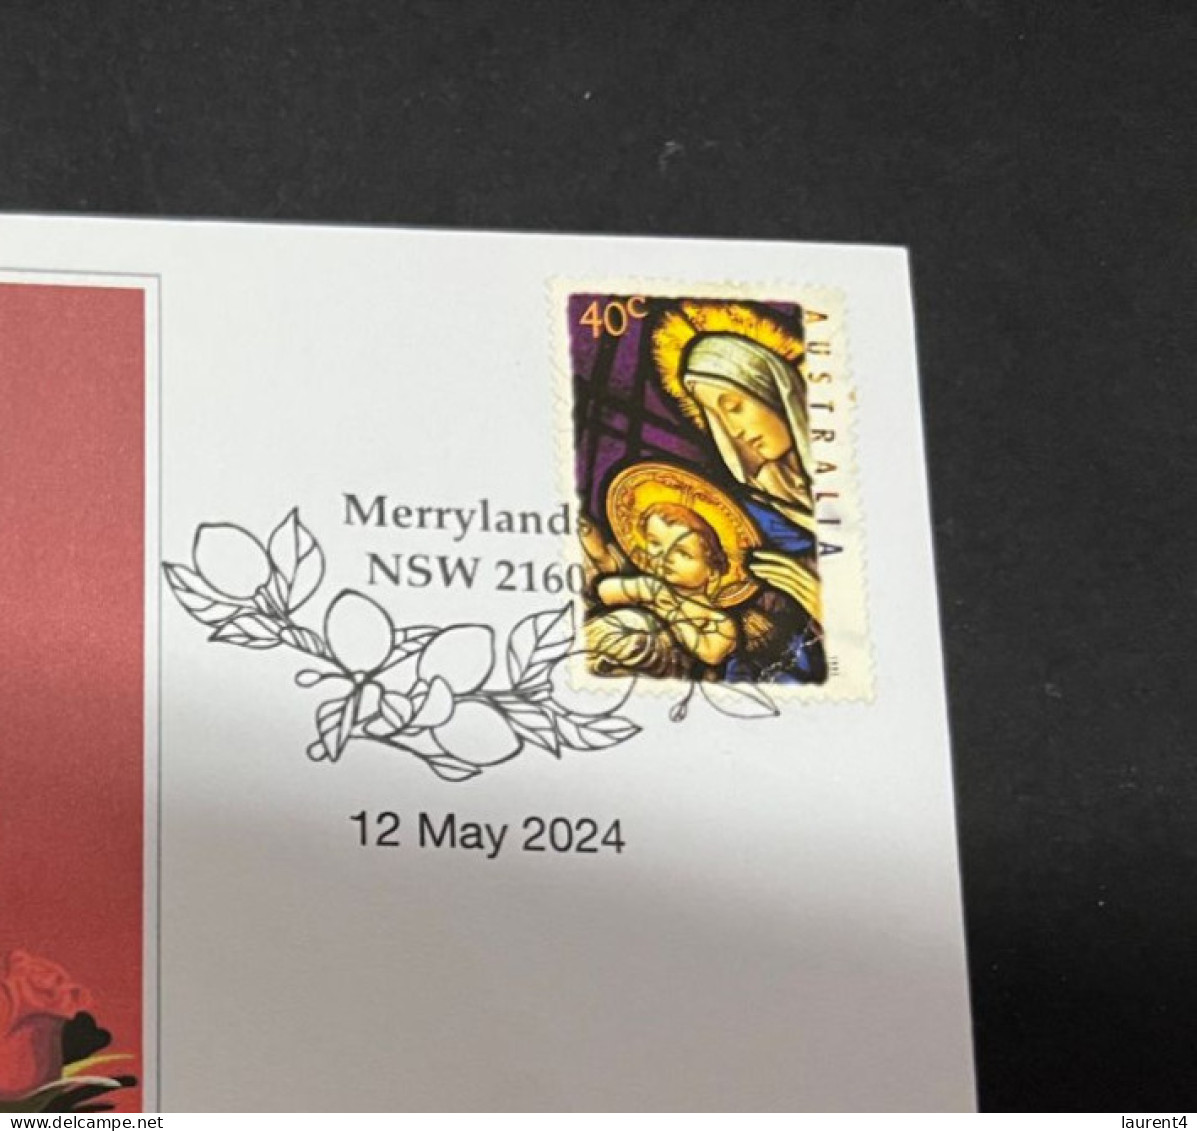 12-5-2024 (4 Z 47A) Mother's Day 2024 (12-5-2024 In Australia) Virgin Mary Stamp - Muttertag